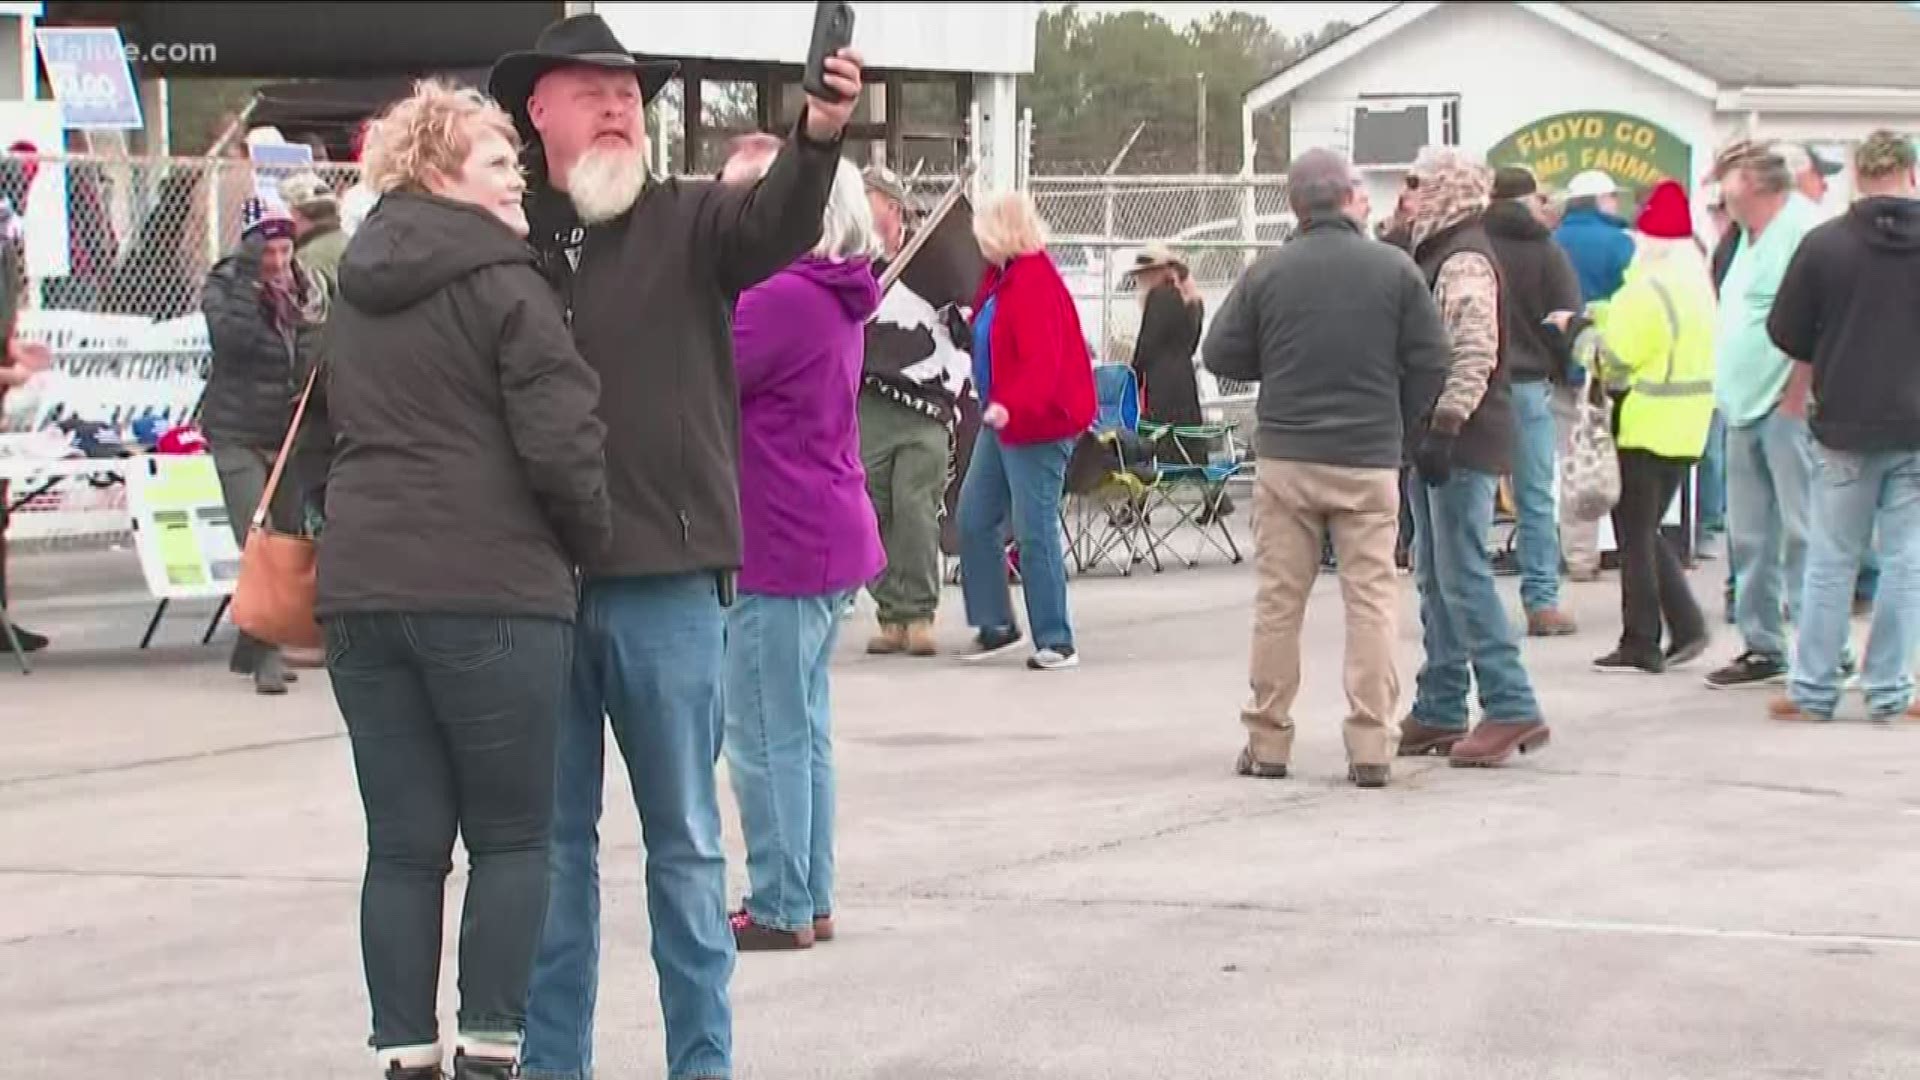 More than 100 people showed up to voice their concerns about the 2nd amendment. Organizers said they want to make Floyd County a 2nd amendment sanctuary county.